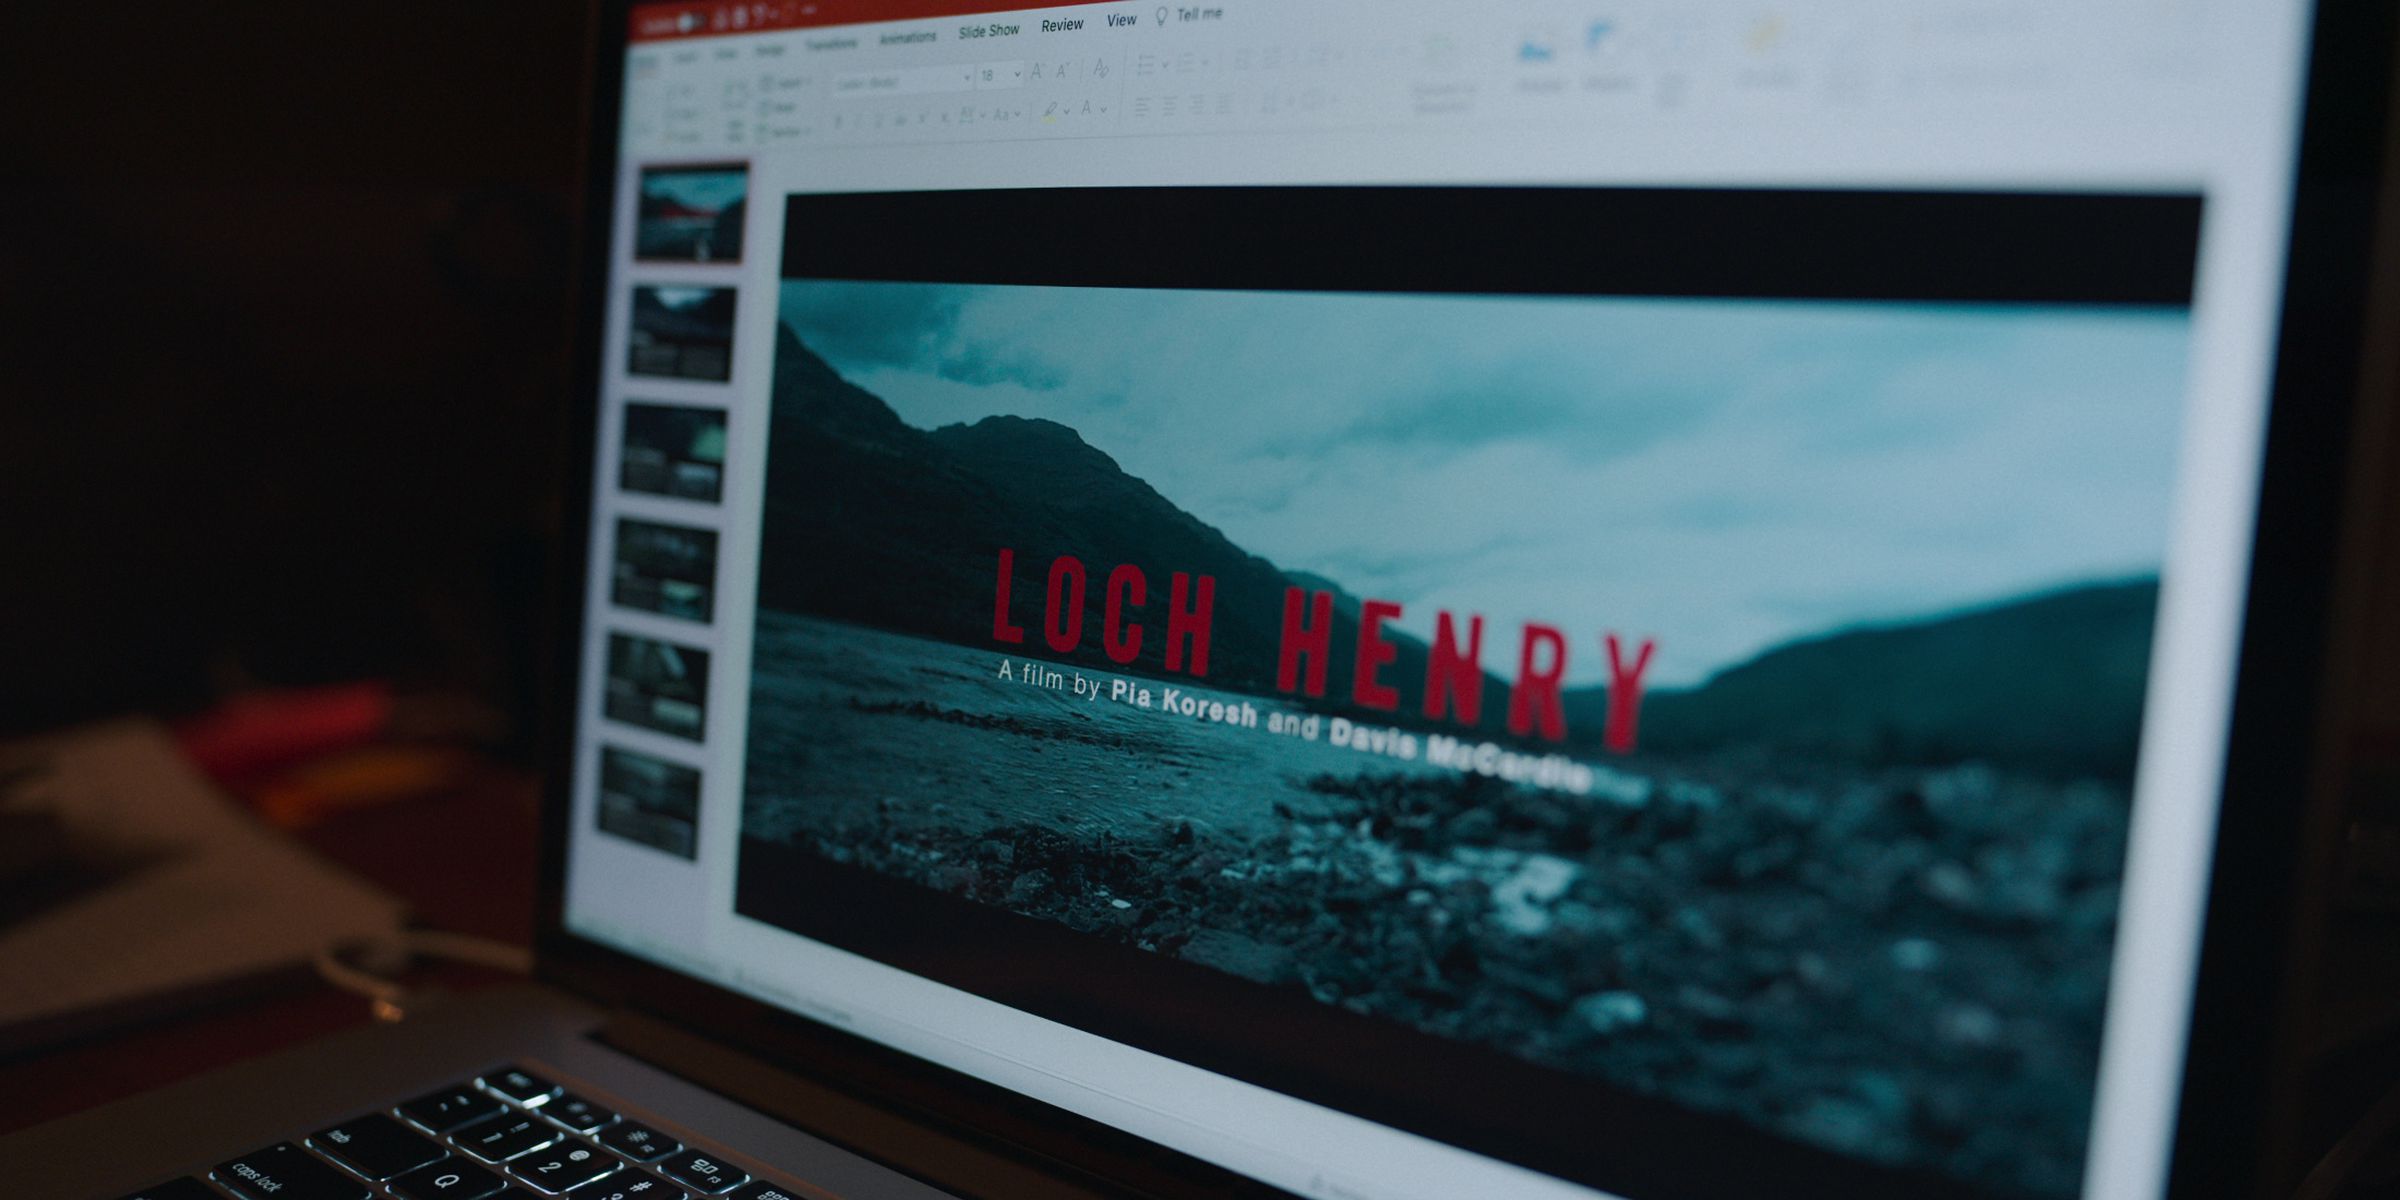 A pitch document on a laptop for a film called “Loch Henry.”